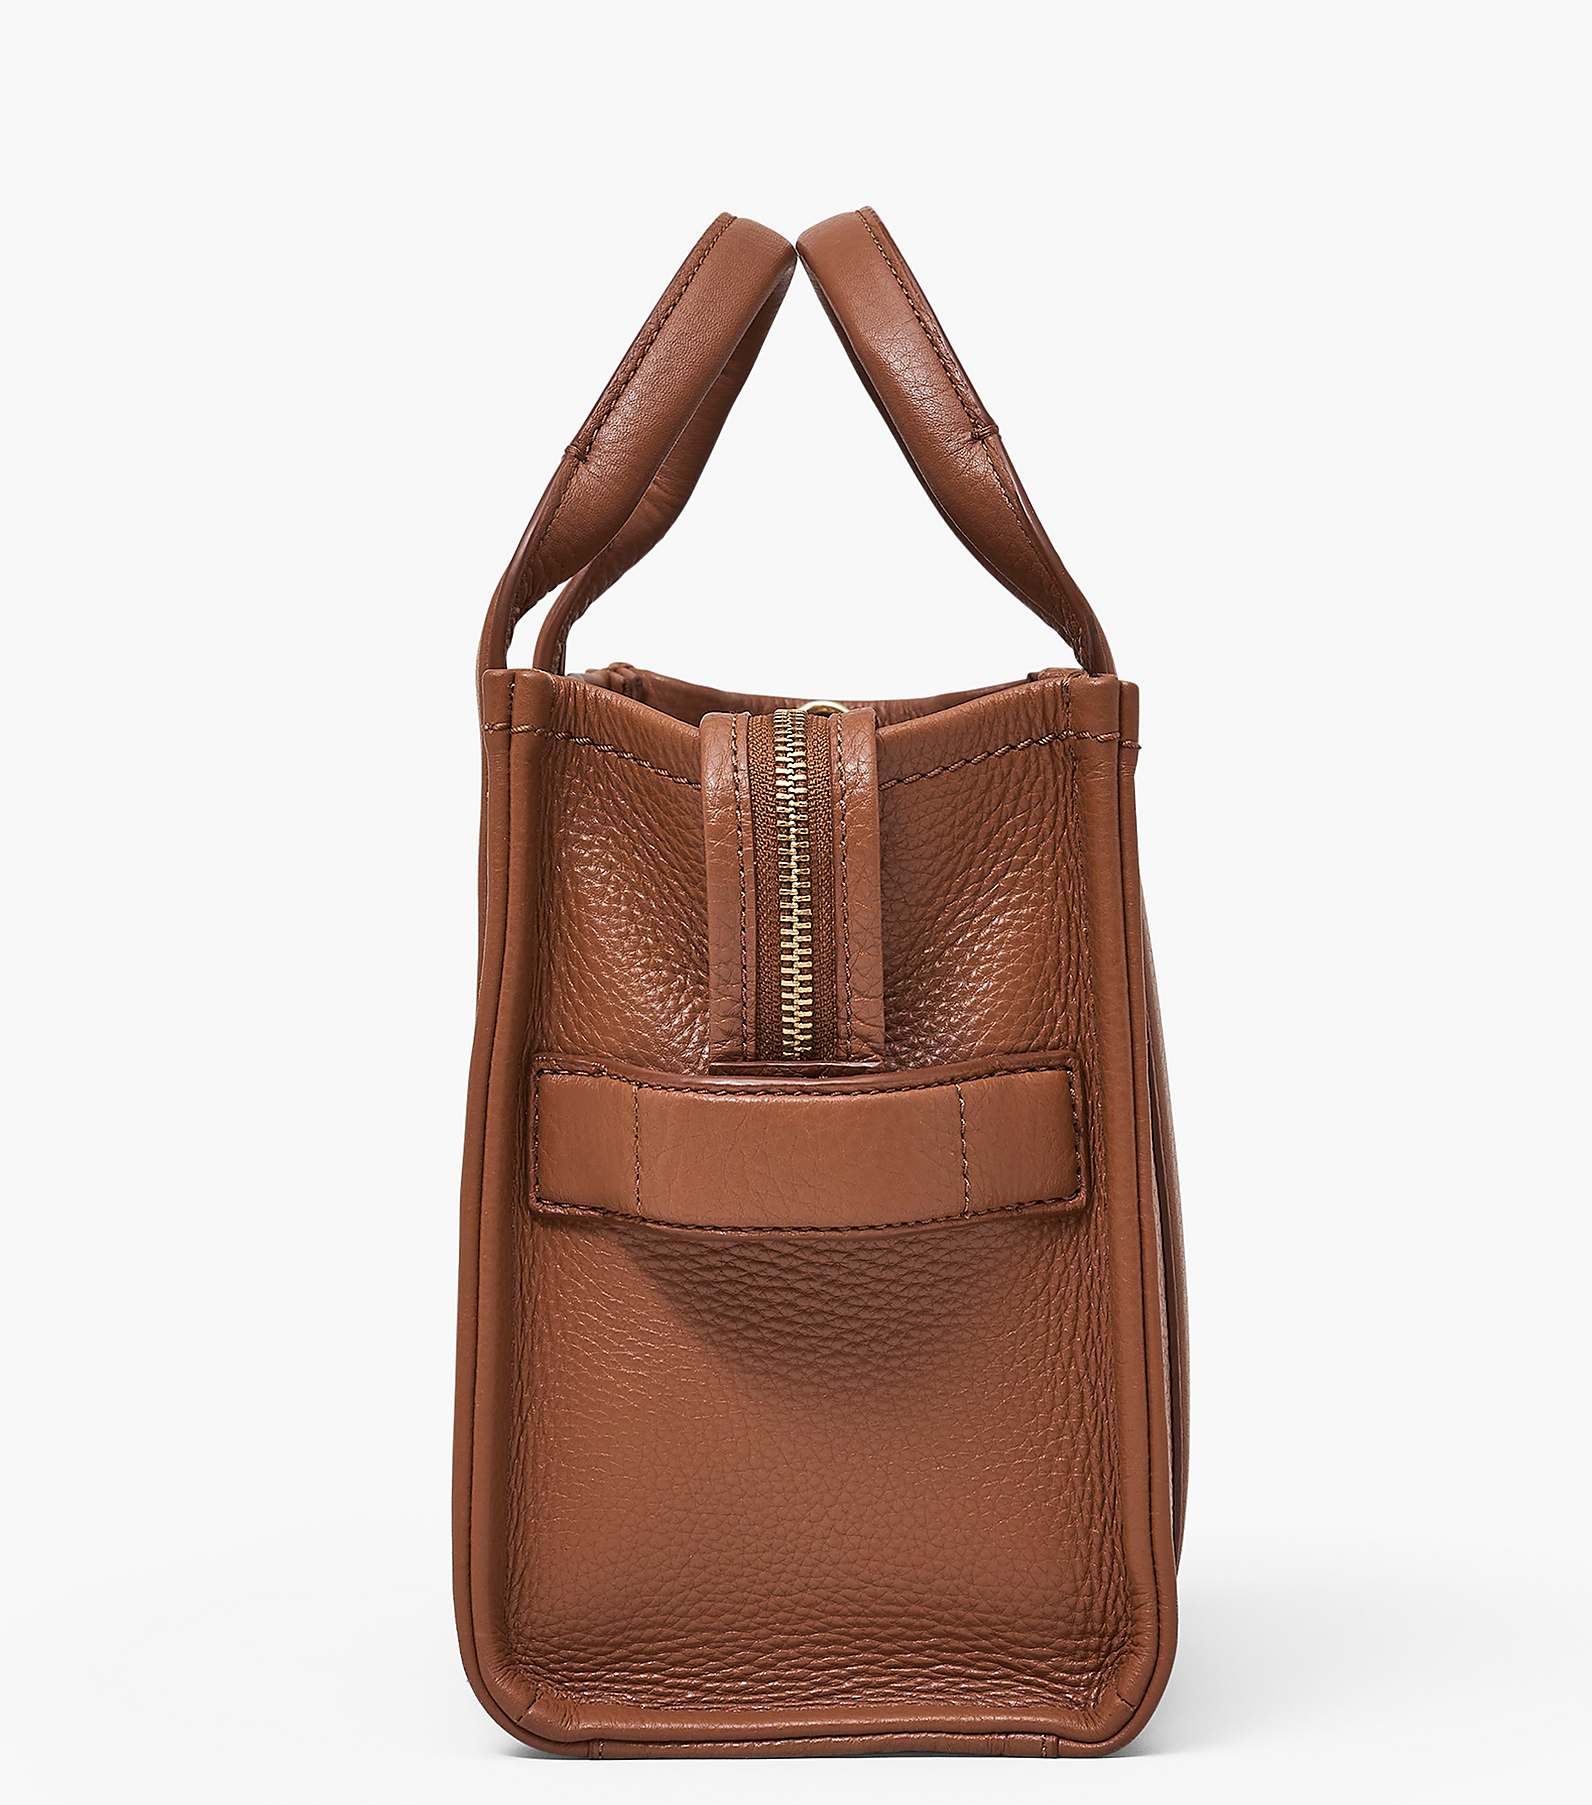 The Leather Mini Tote Bag | Marc Jacobs | Official Site